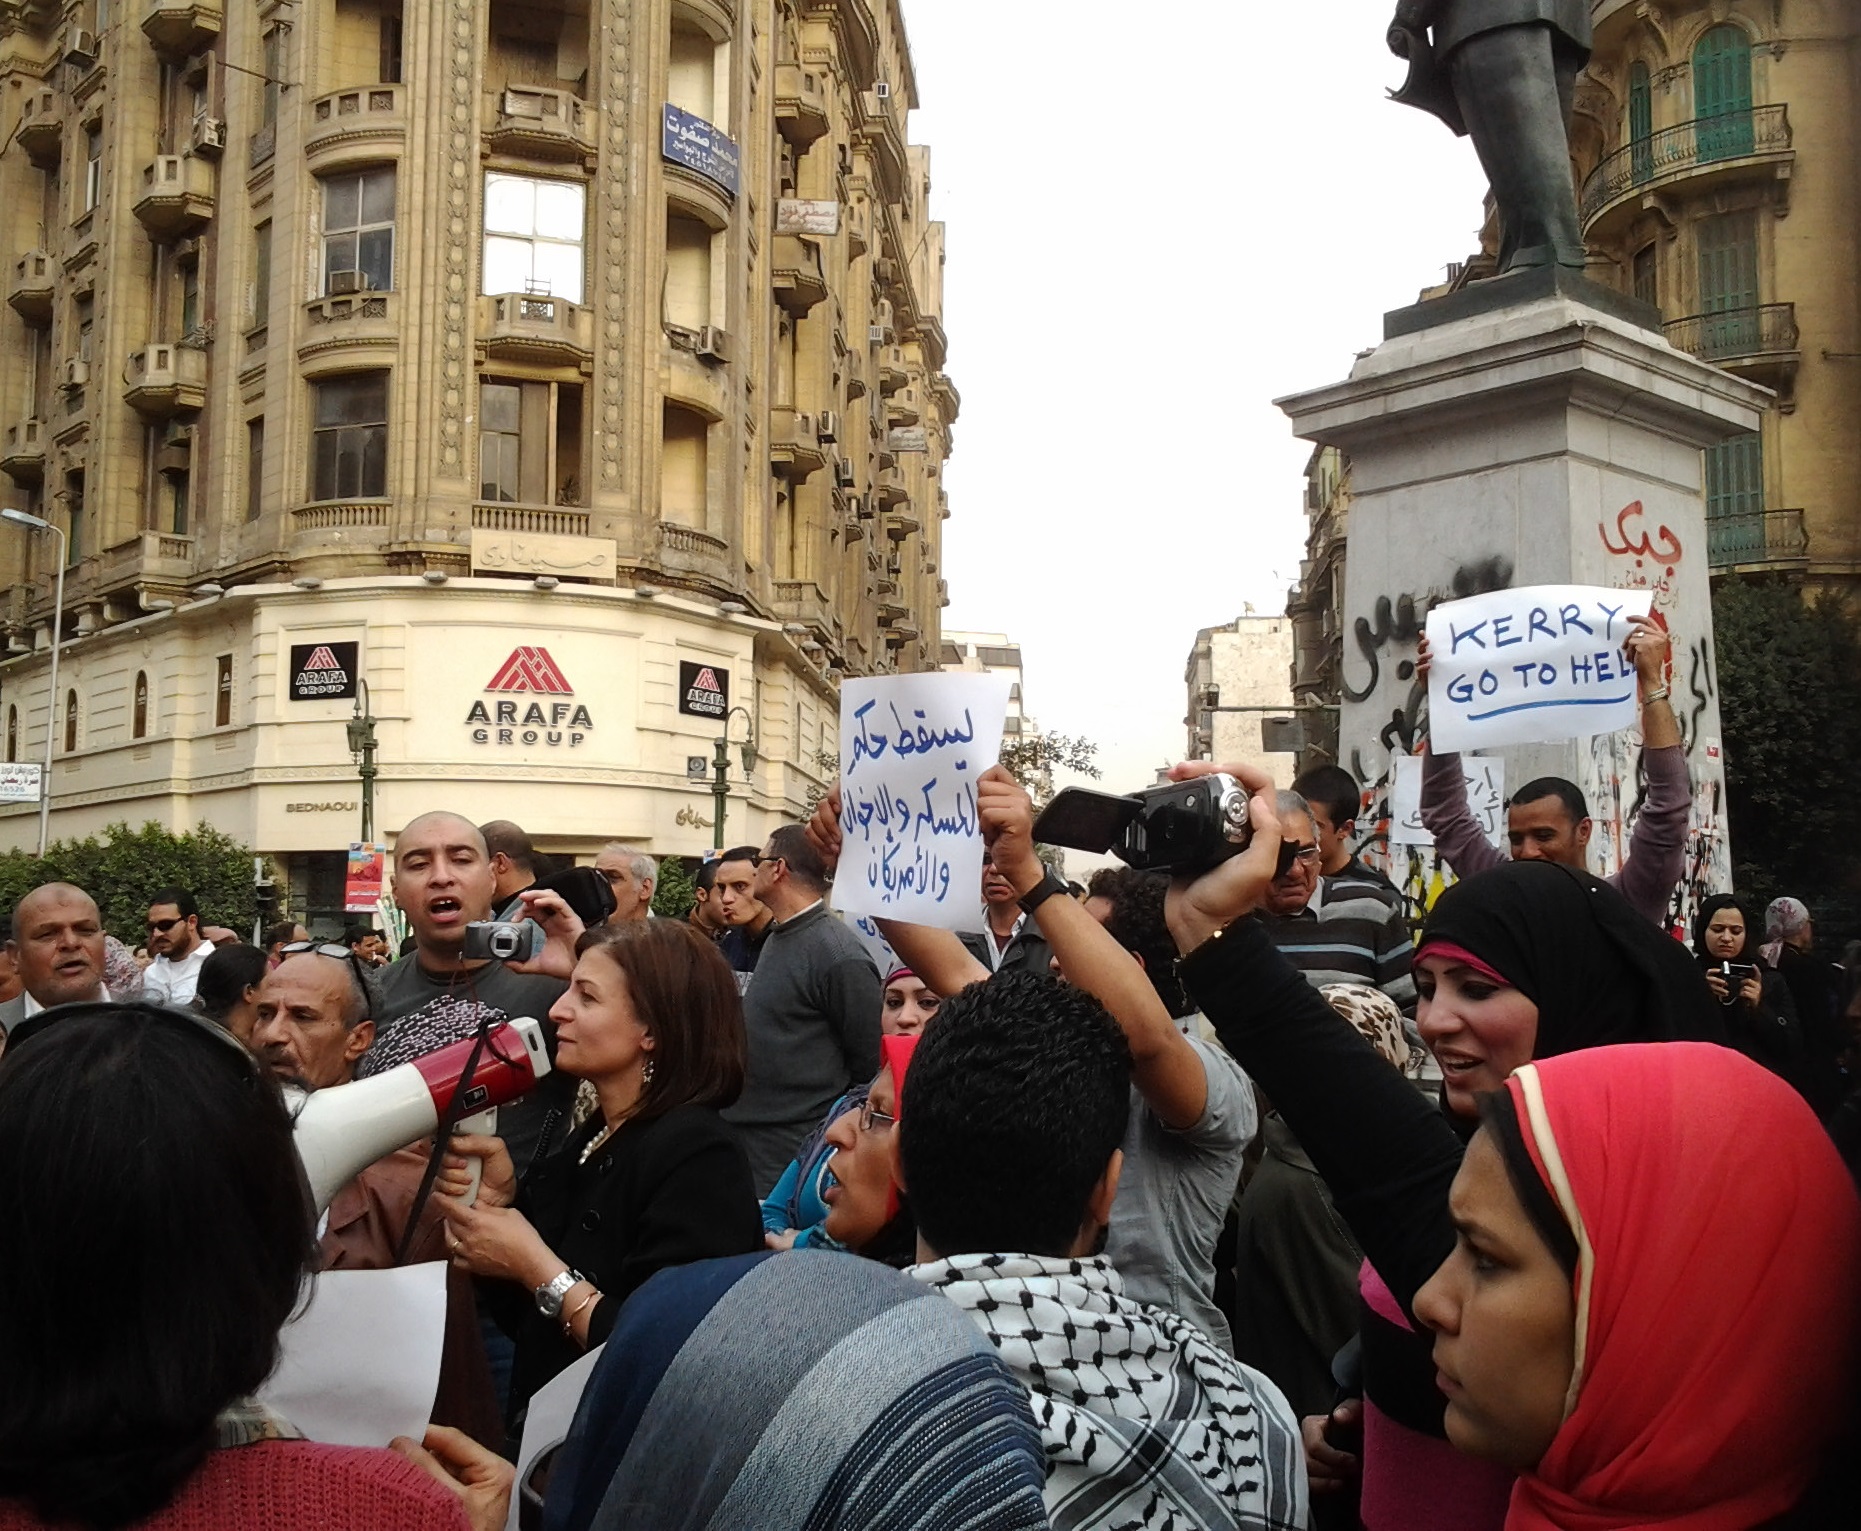 Hundreds protested in Tala’at Harb Square in Downtown Cairo on Saturday against President Morsi and the Muslim Brotherhood, in solidarity with the citizen killed by Central Security Forces (CSF) in Mansoura on Friday (Photo by Fady Salah)